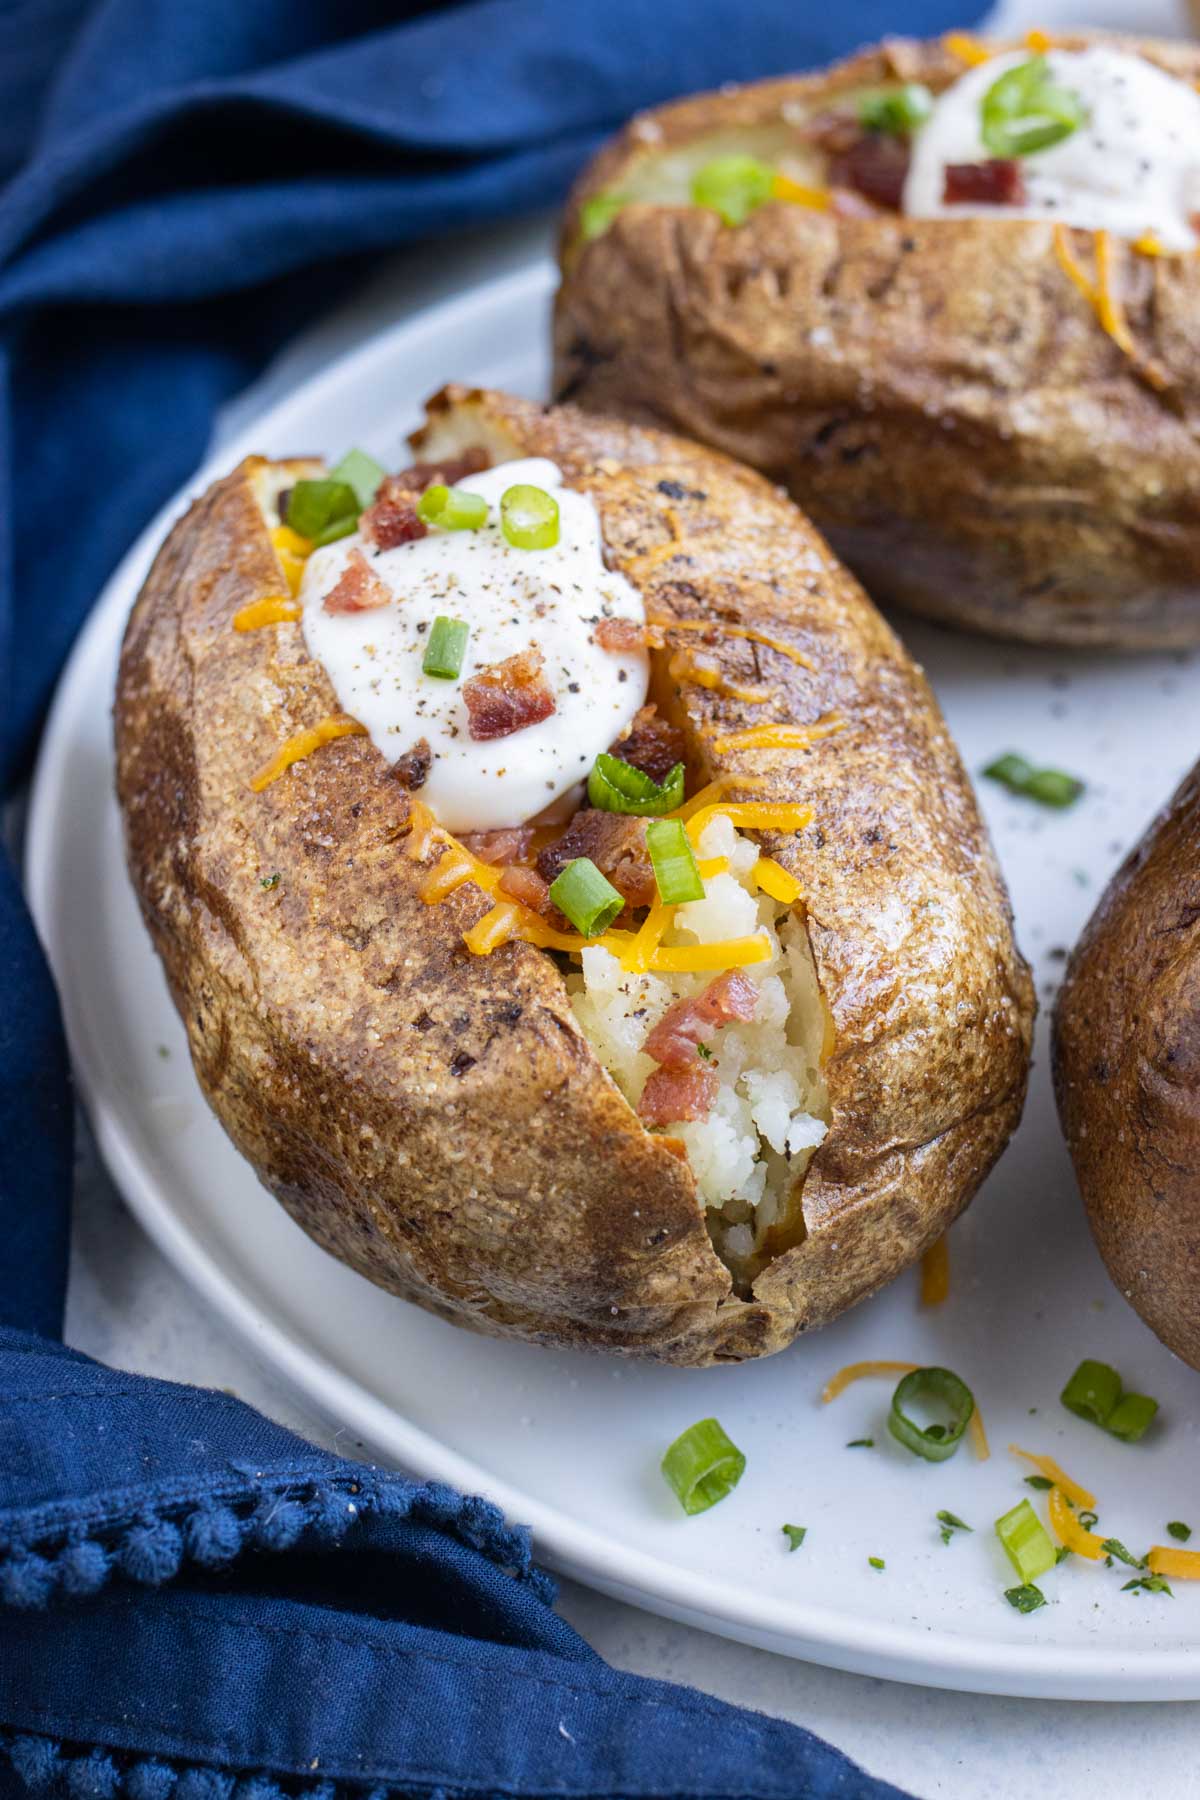 Air fryer baked potatoes are topped with sour cream, cheese, chives, and bacon.